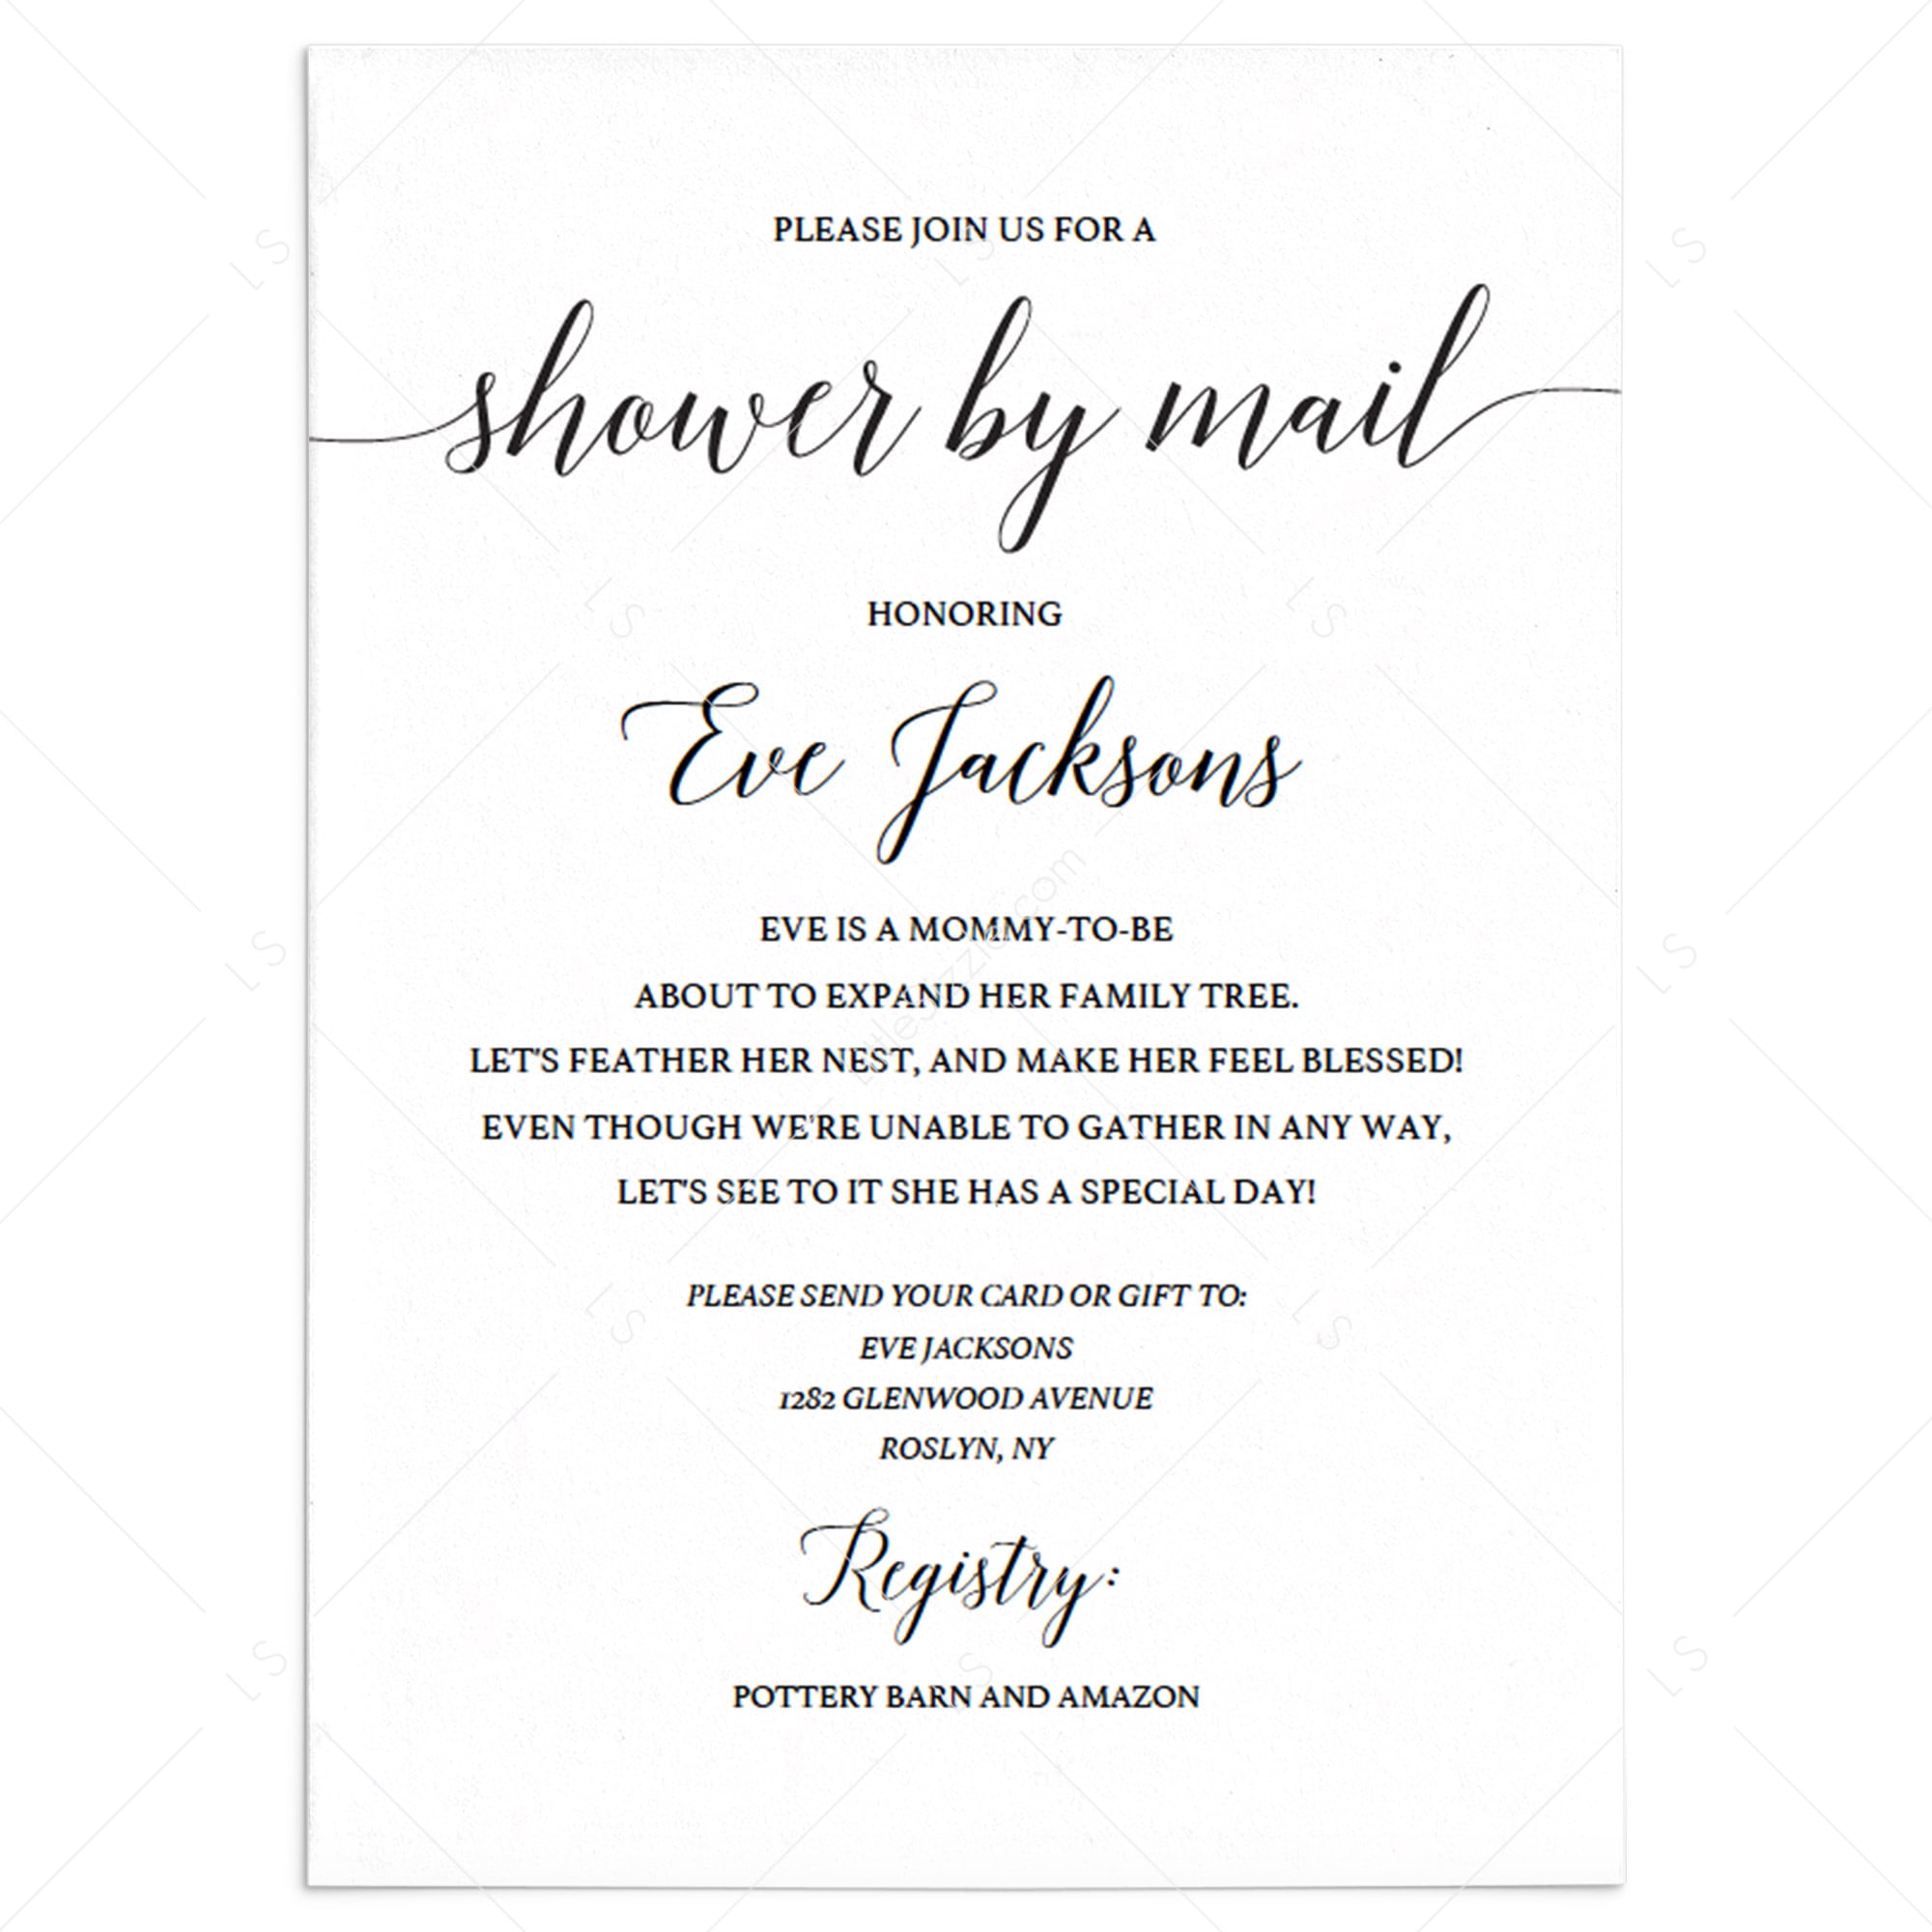 Baby Shower By Mail Invitation Template Minimalist by LittleSizzle